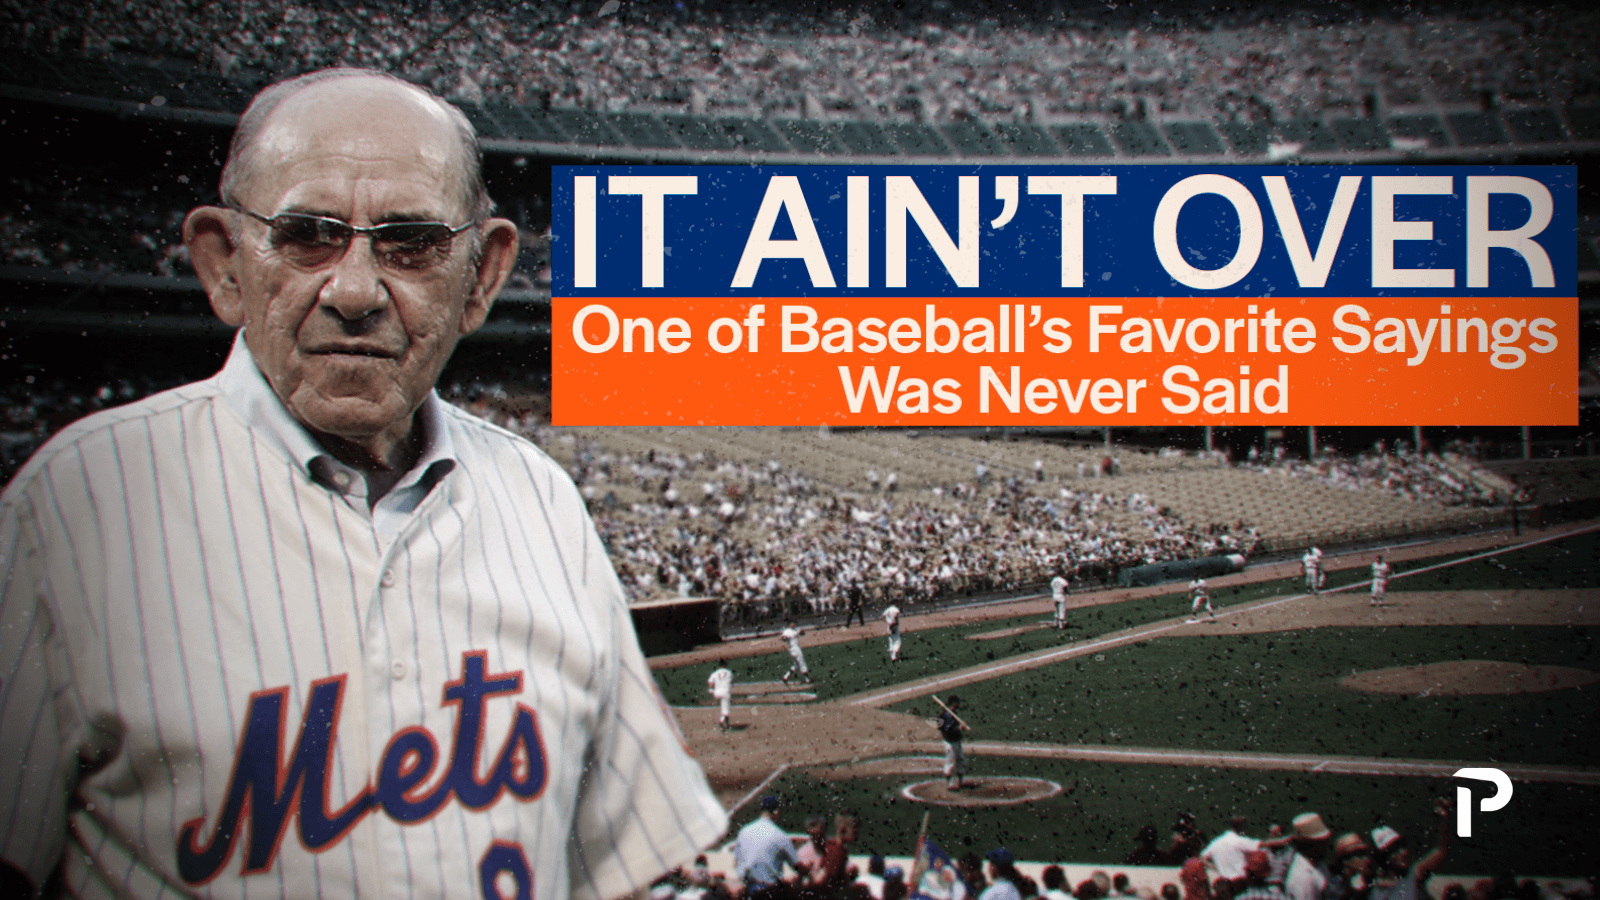 It Ain't Over: One of Baseball's Favorite Sayings was Never Said